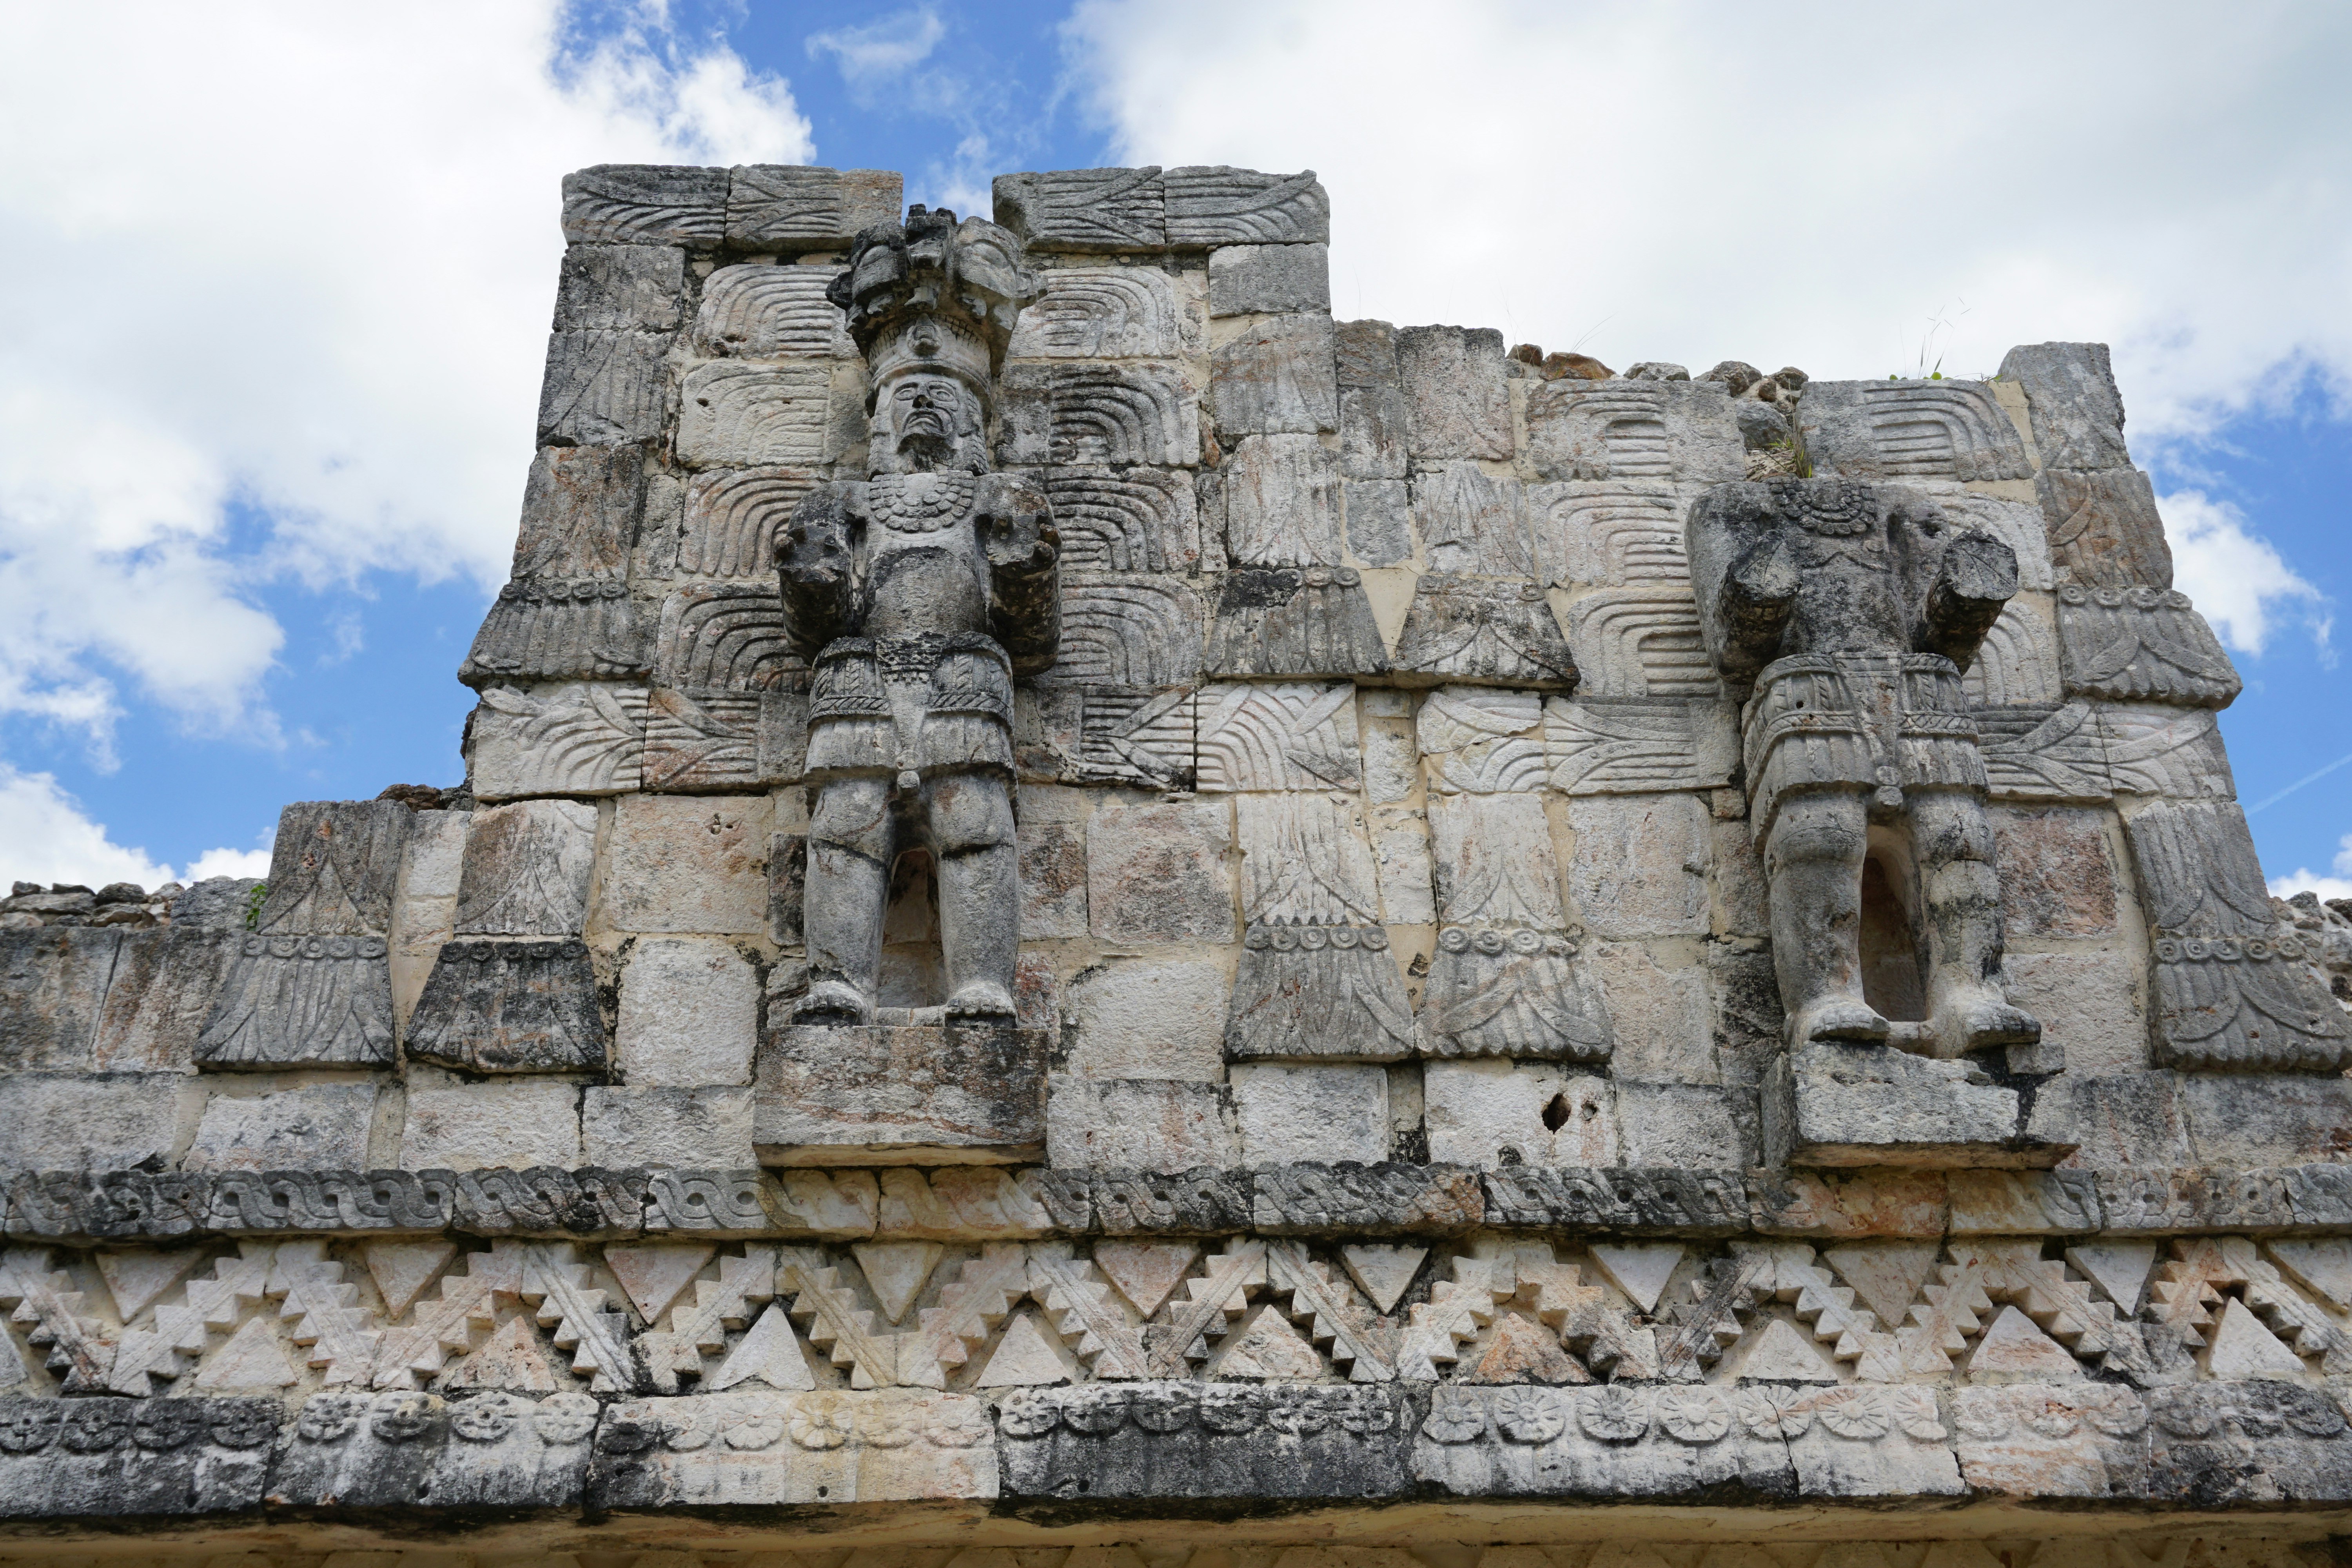 Stone reliefs of Mayan gods on the side of a pyramid